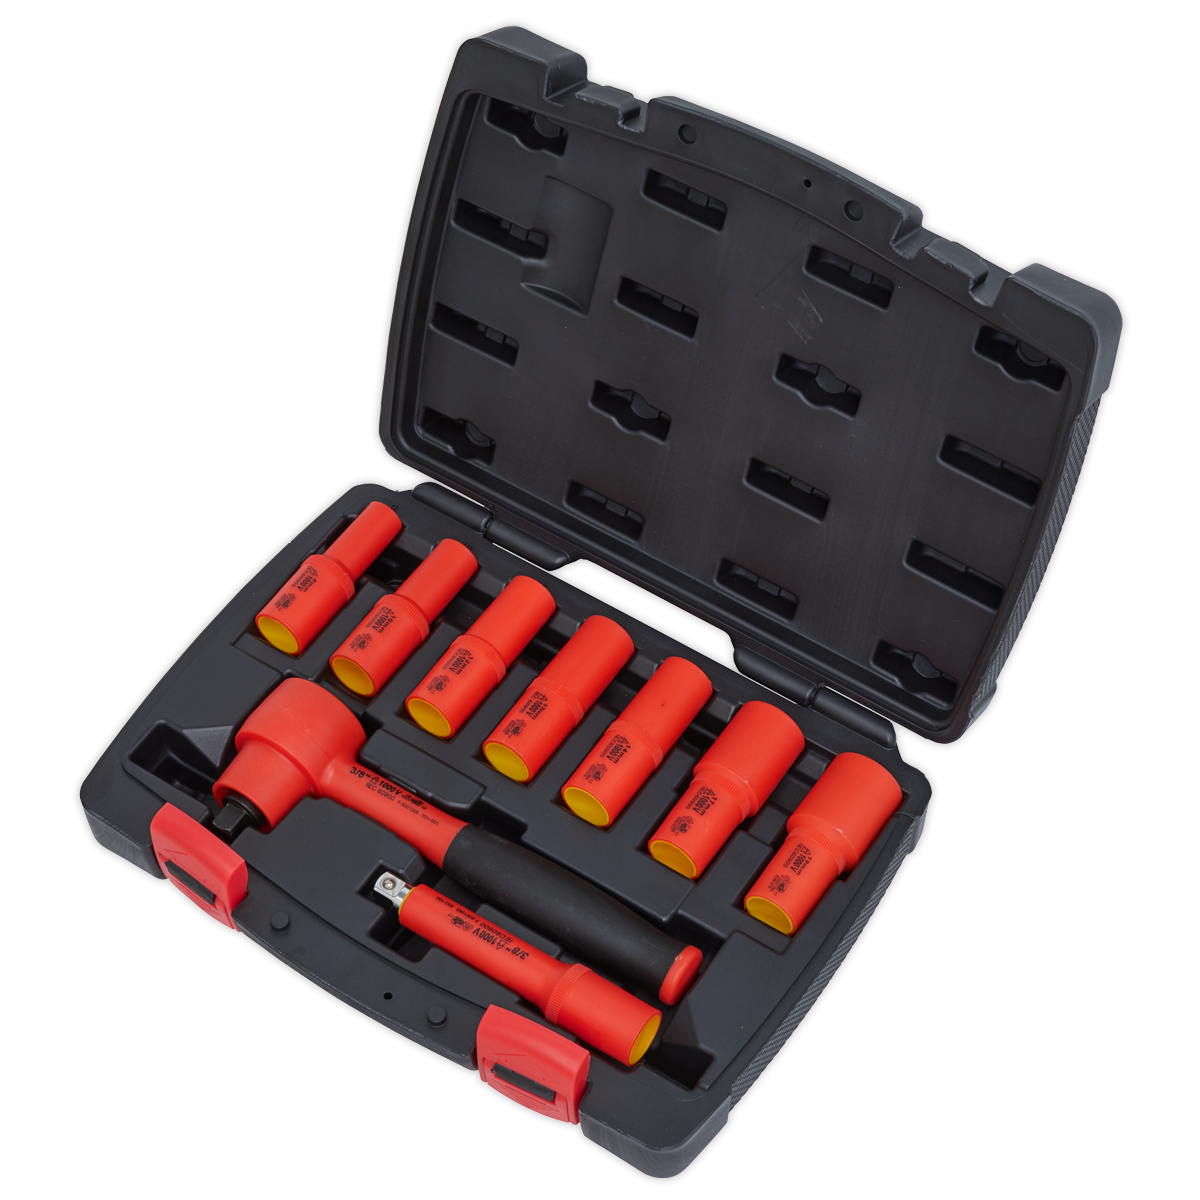 Insulated Socket Set 9pc 3/8"Sq Drive 6pt WallDrive® VDE Approved - AK7942 - Farming Parts